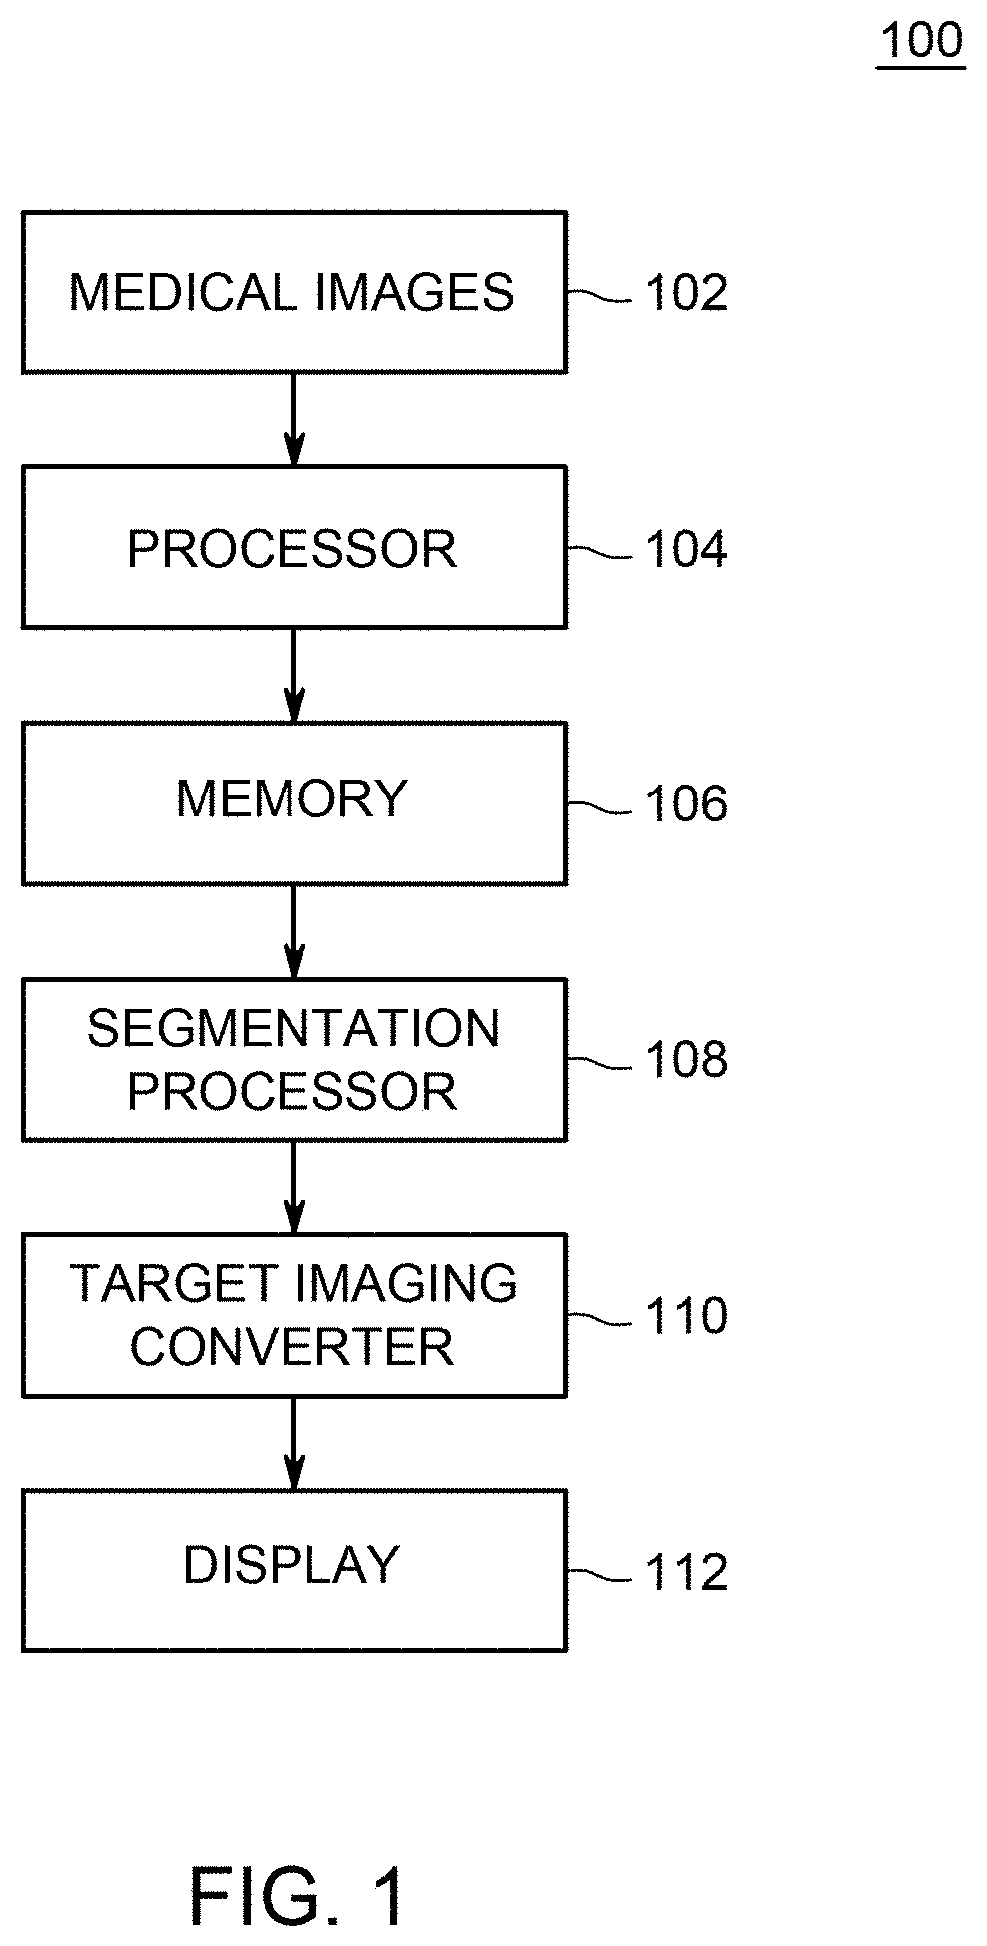 Method and apparatus for automated target and tissue segmentation using multi-modal imaging and ensemble machine learning models